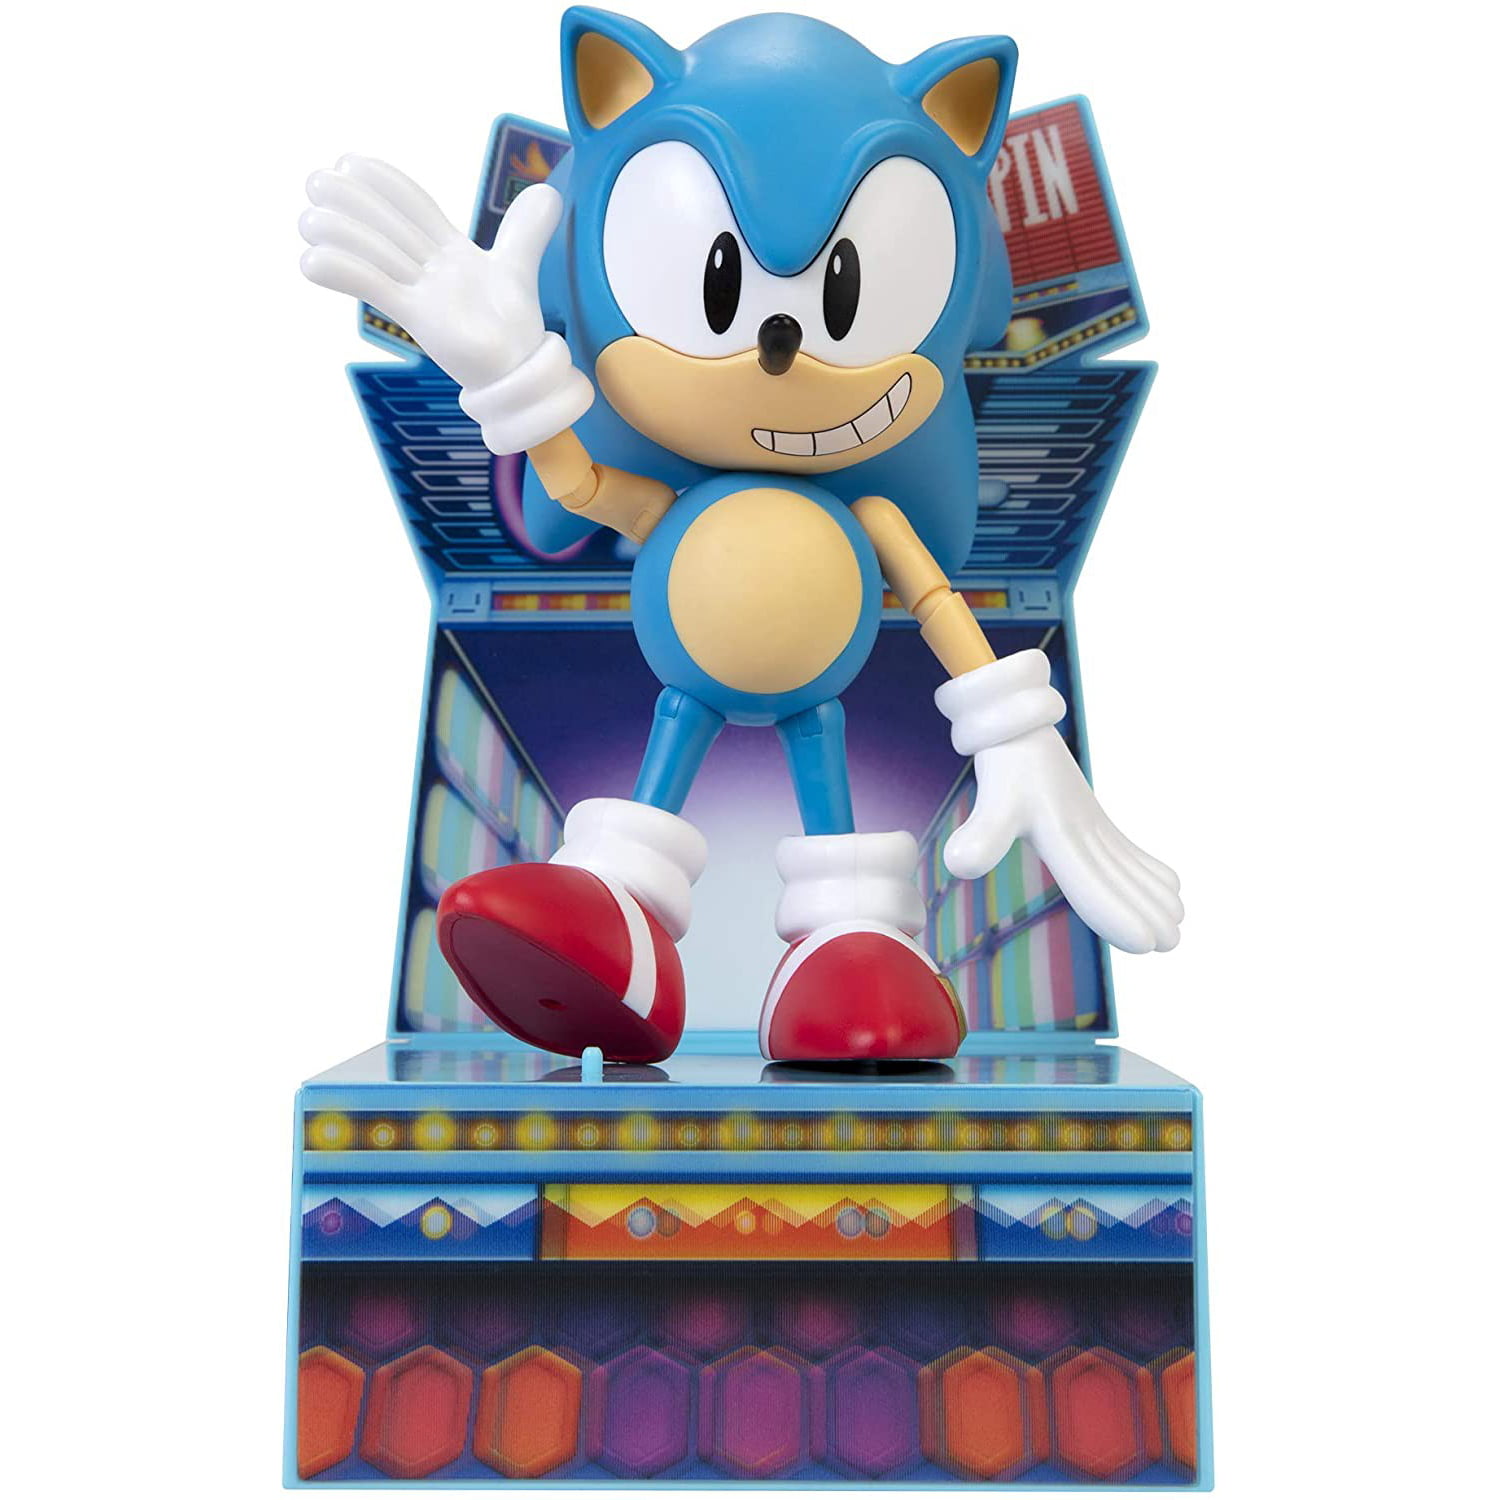 6" Sonic The Hedgehog Ultimate Sonic Collectible Action Figure w/ 12 Swappable Parts $14.85 + Free S&H w/ Walmart+ or $35+